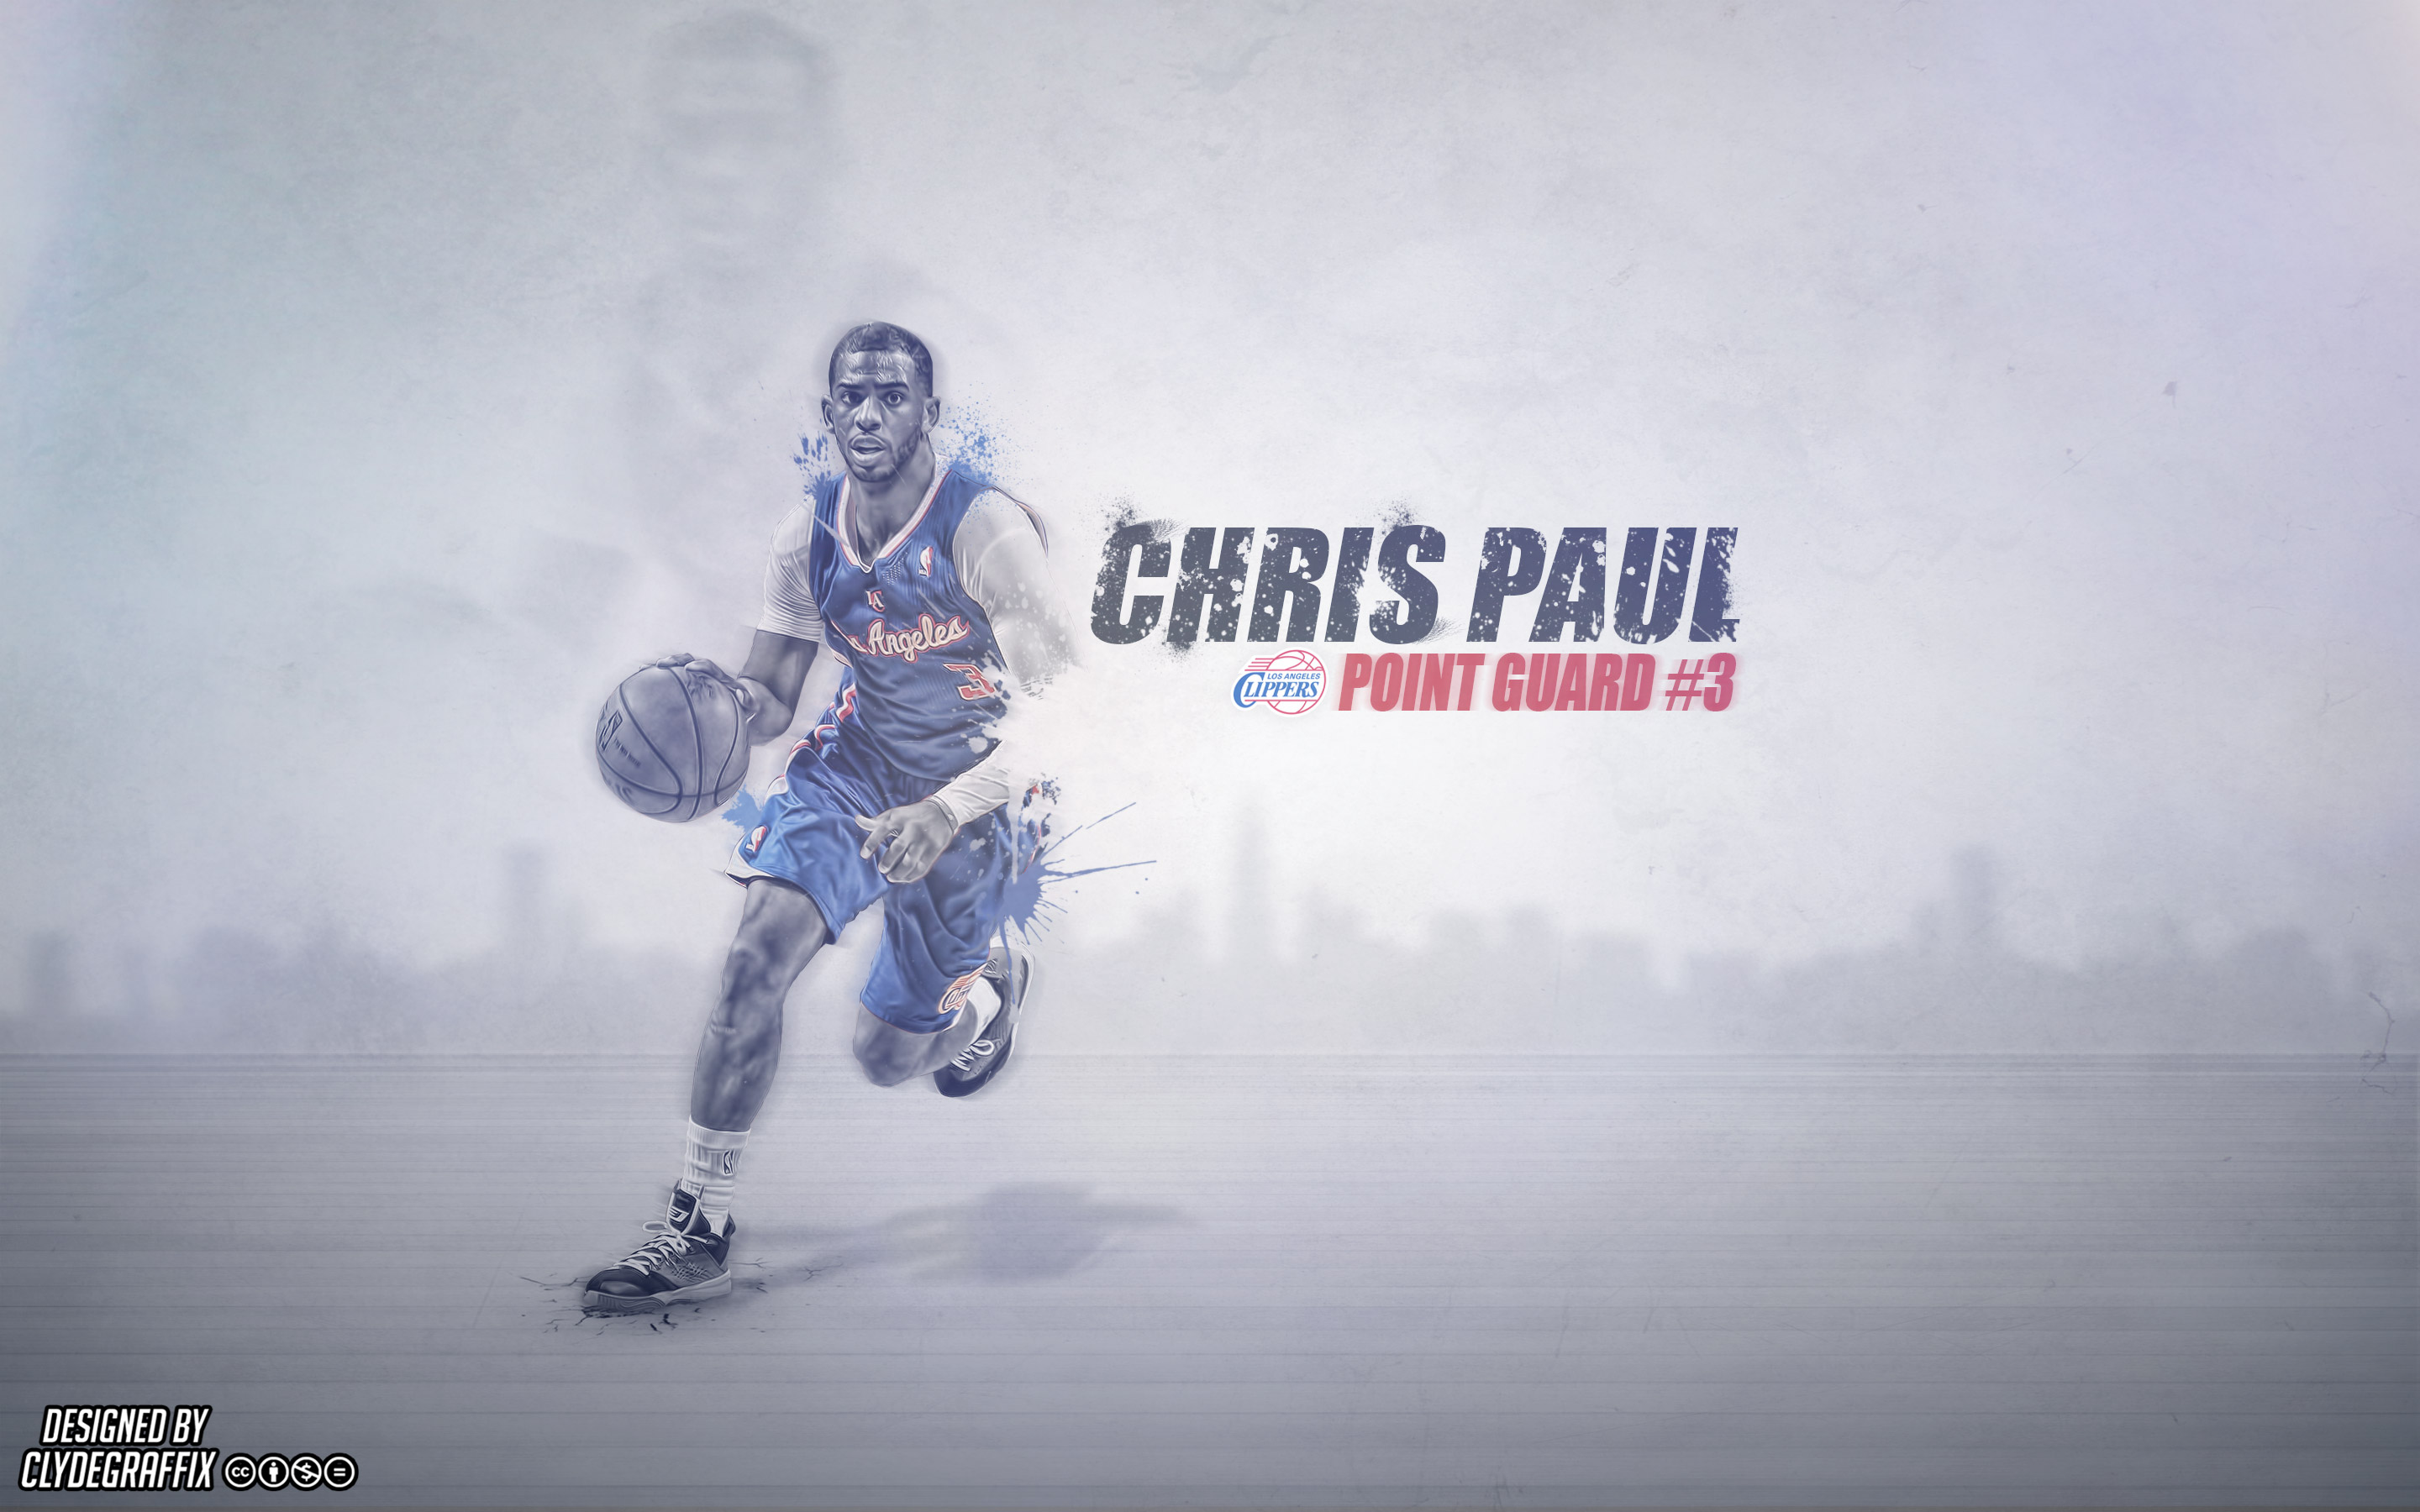 Wallpapers LA Clippers